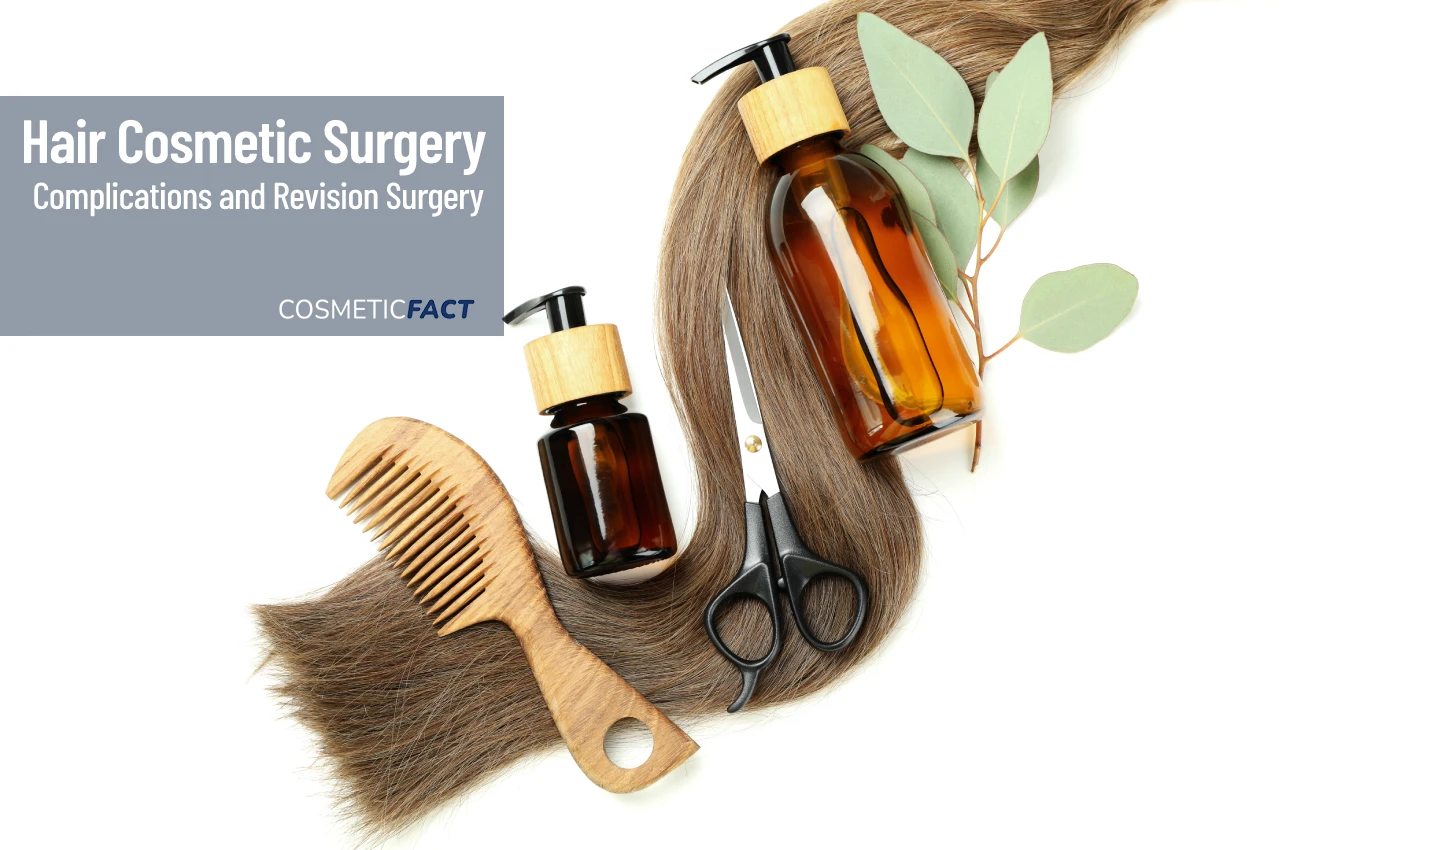 A bottle of natural hair oil treatment, a comb and some strands of hair on a white background. These are natural remedies for hair transplant complications.